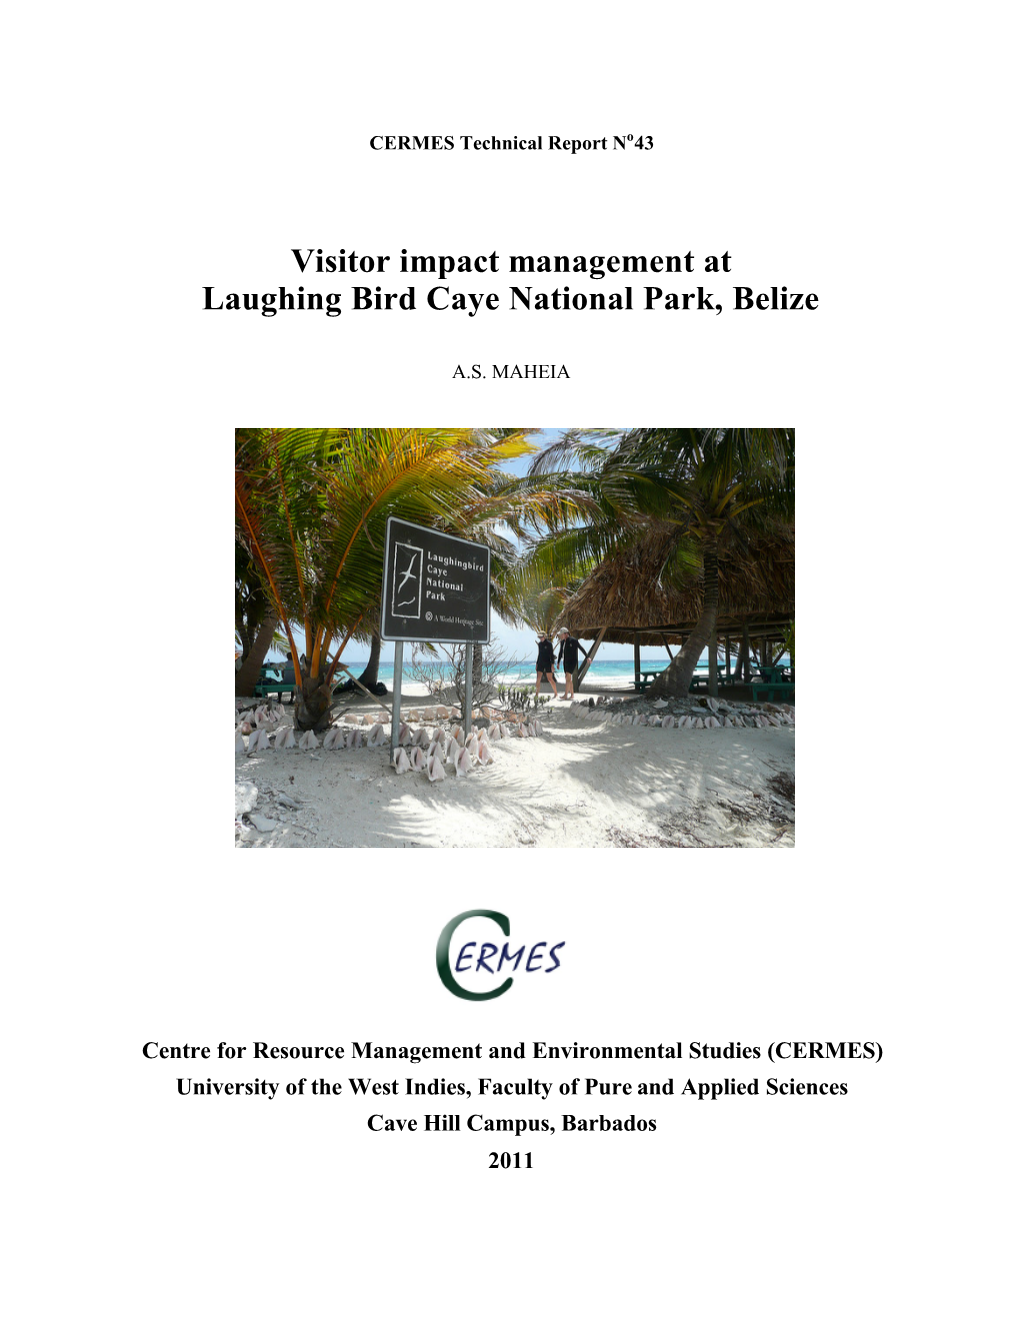 Visitor Impact Management at Laughing Bird Caye National Park, Belize